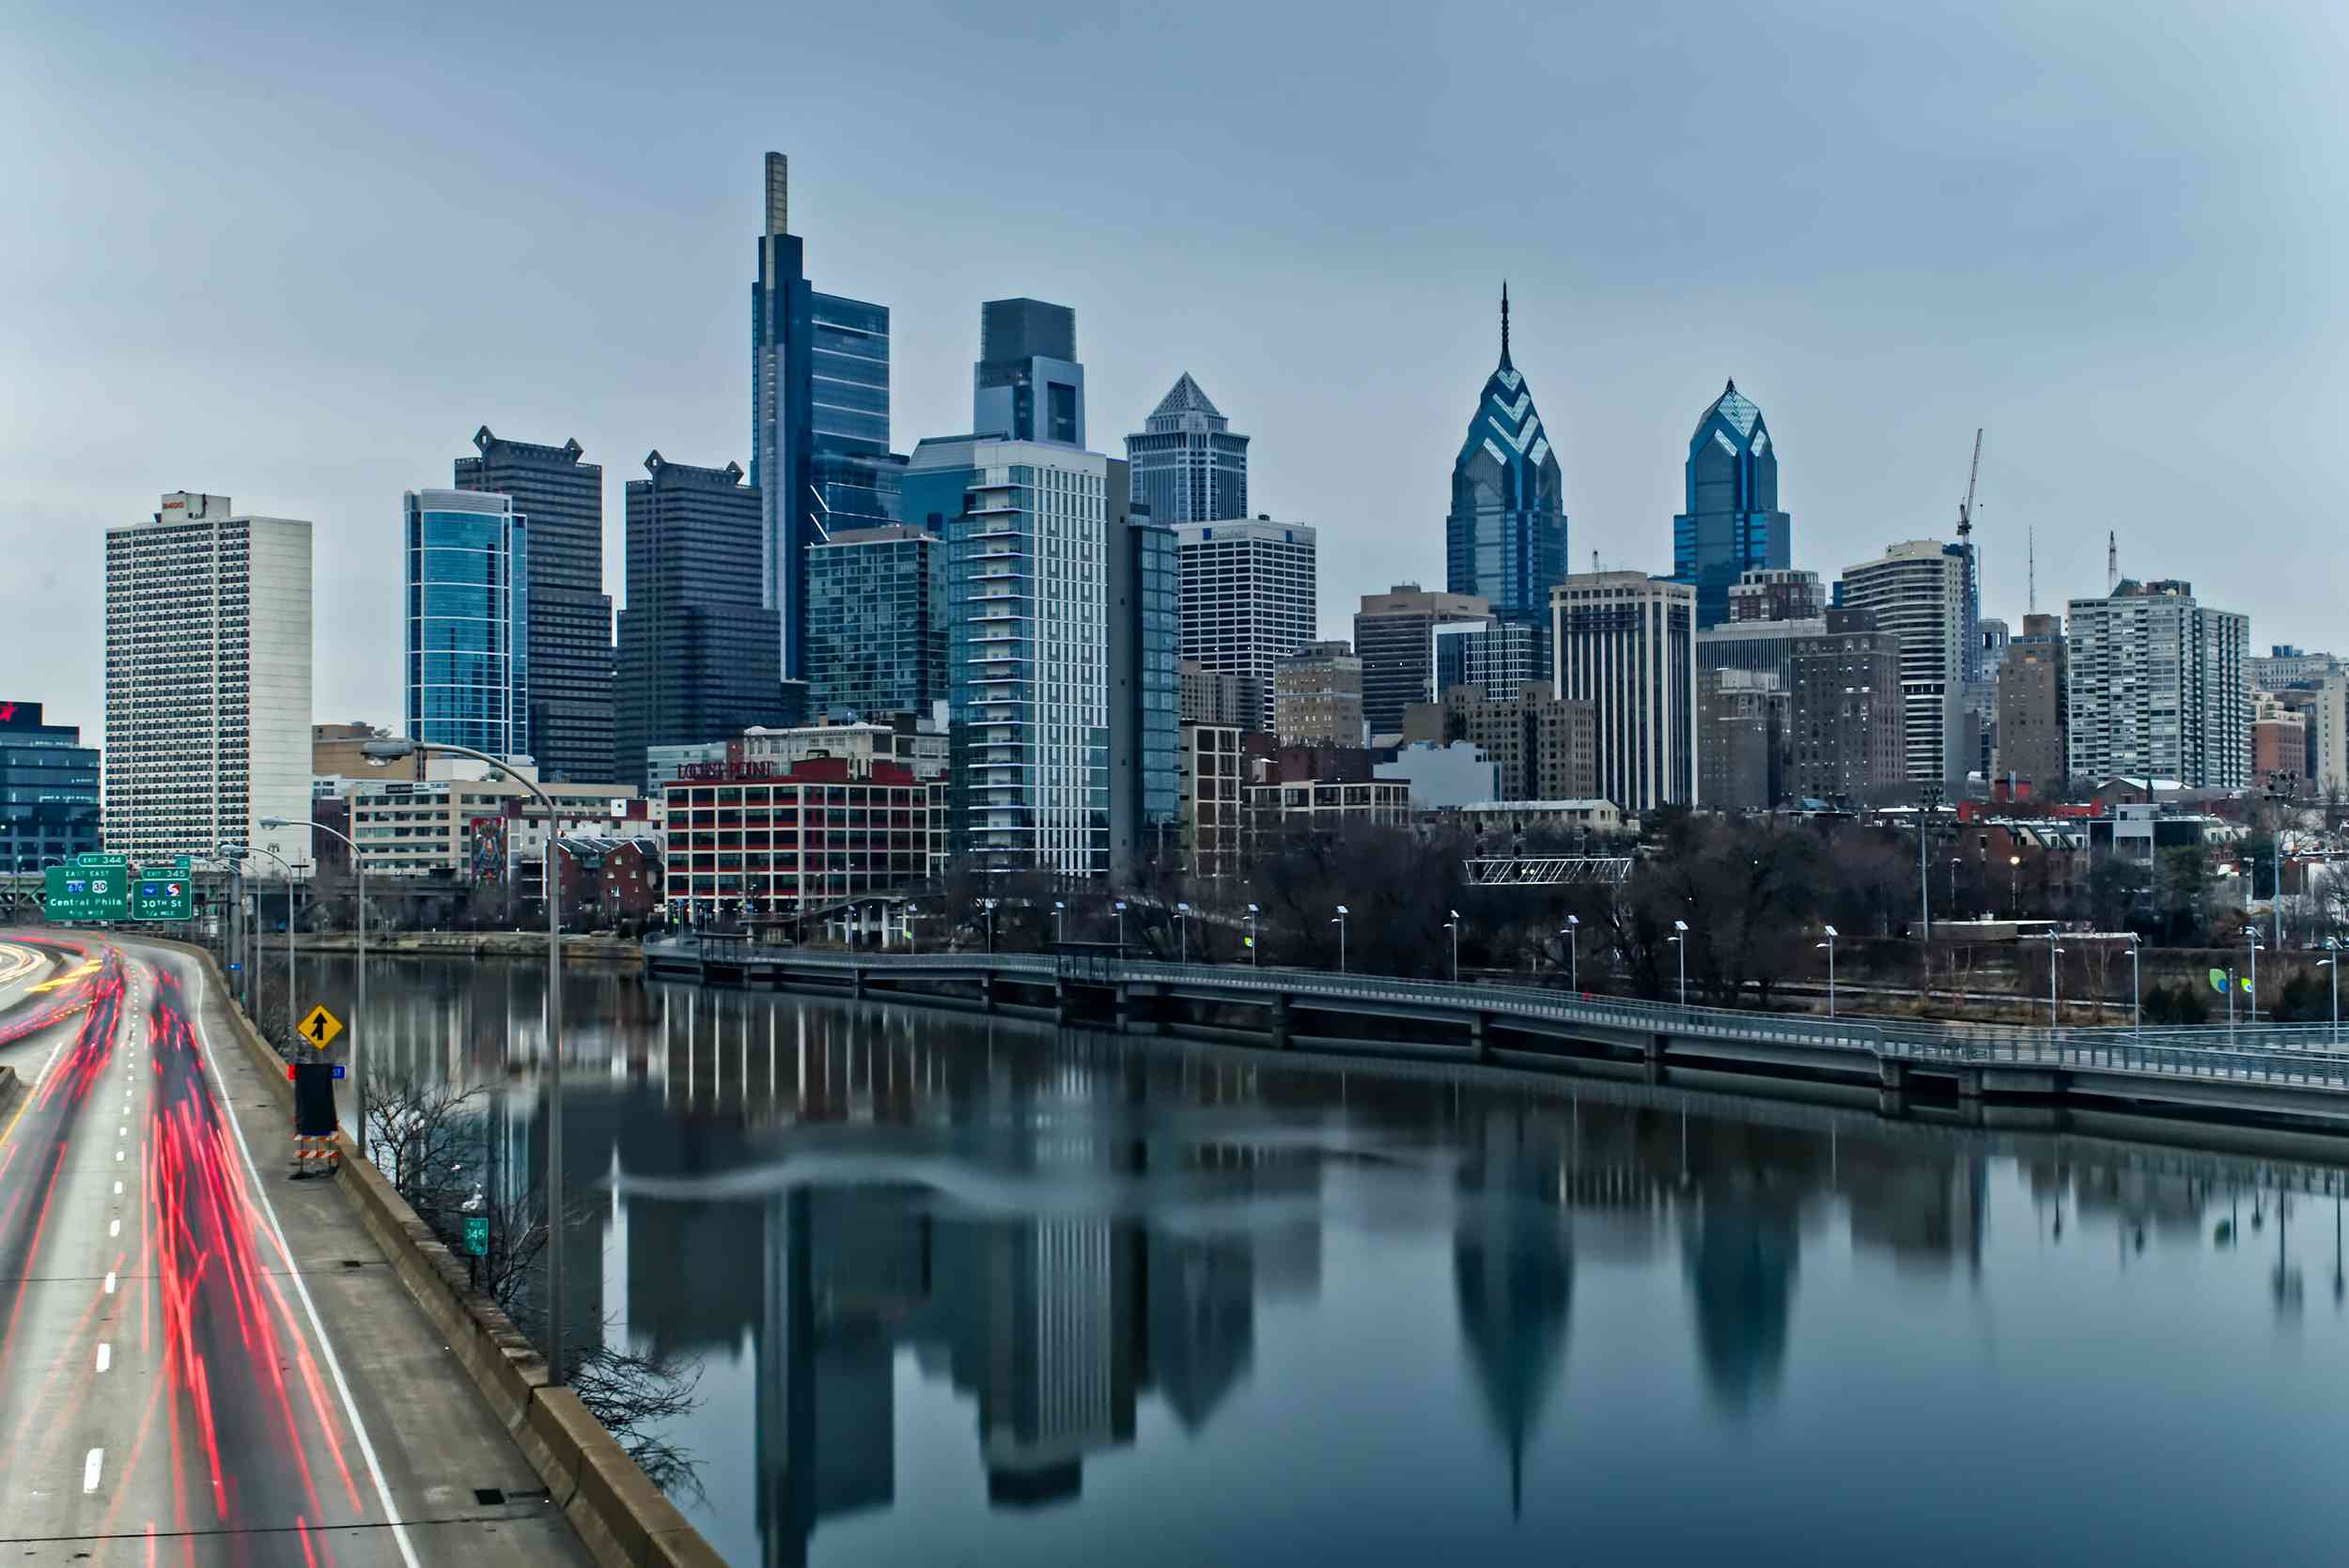 Is Philadelphia Tap Water Safe to Drink? Tap water & safety quality